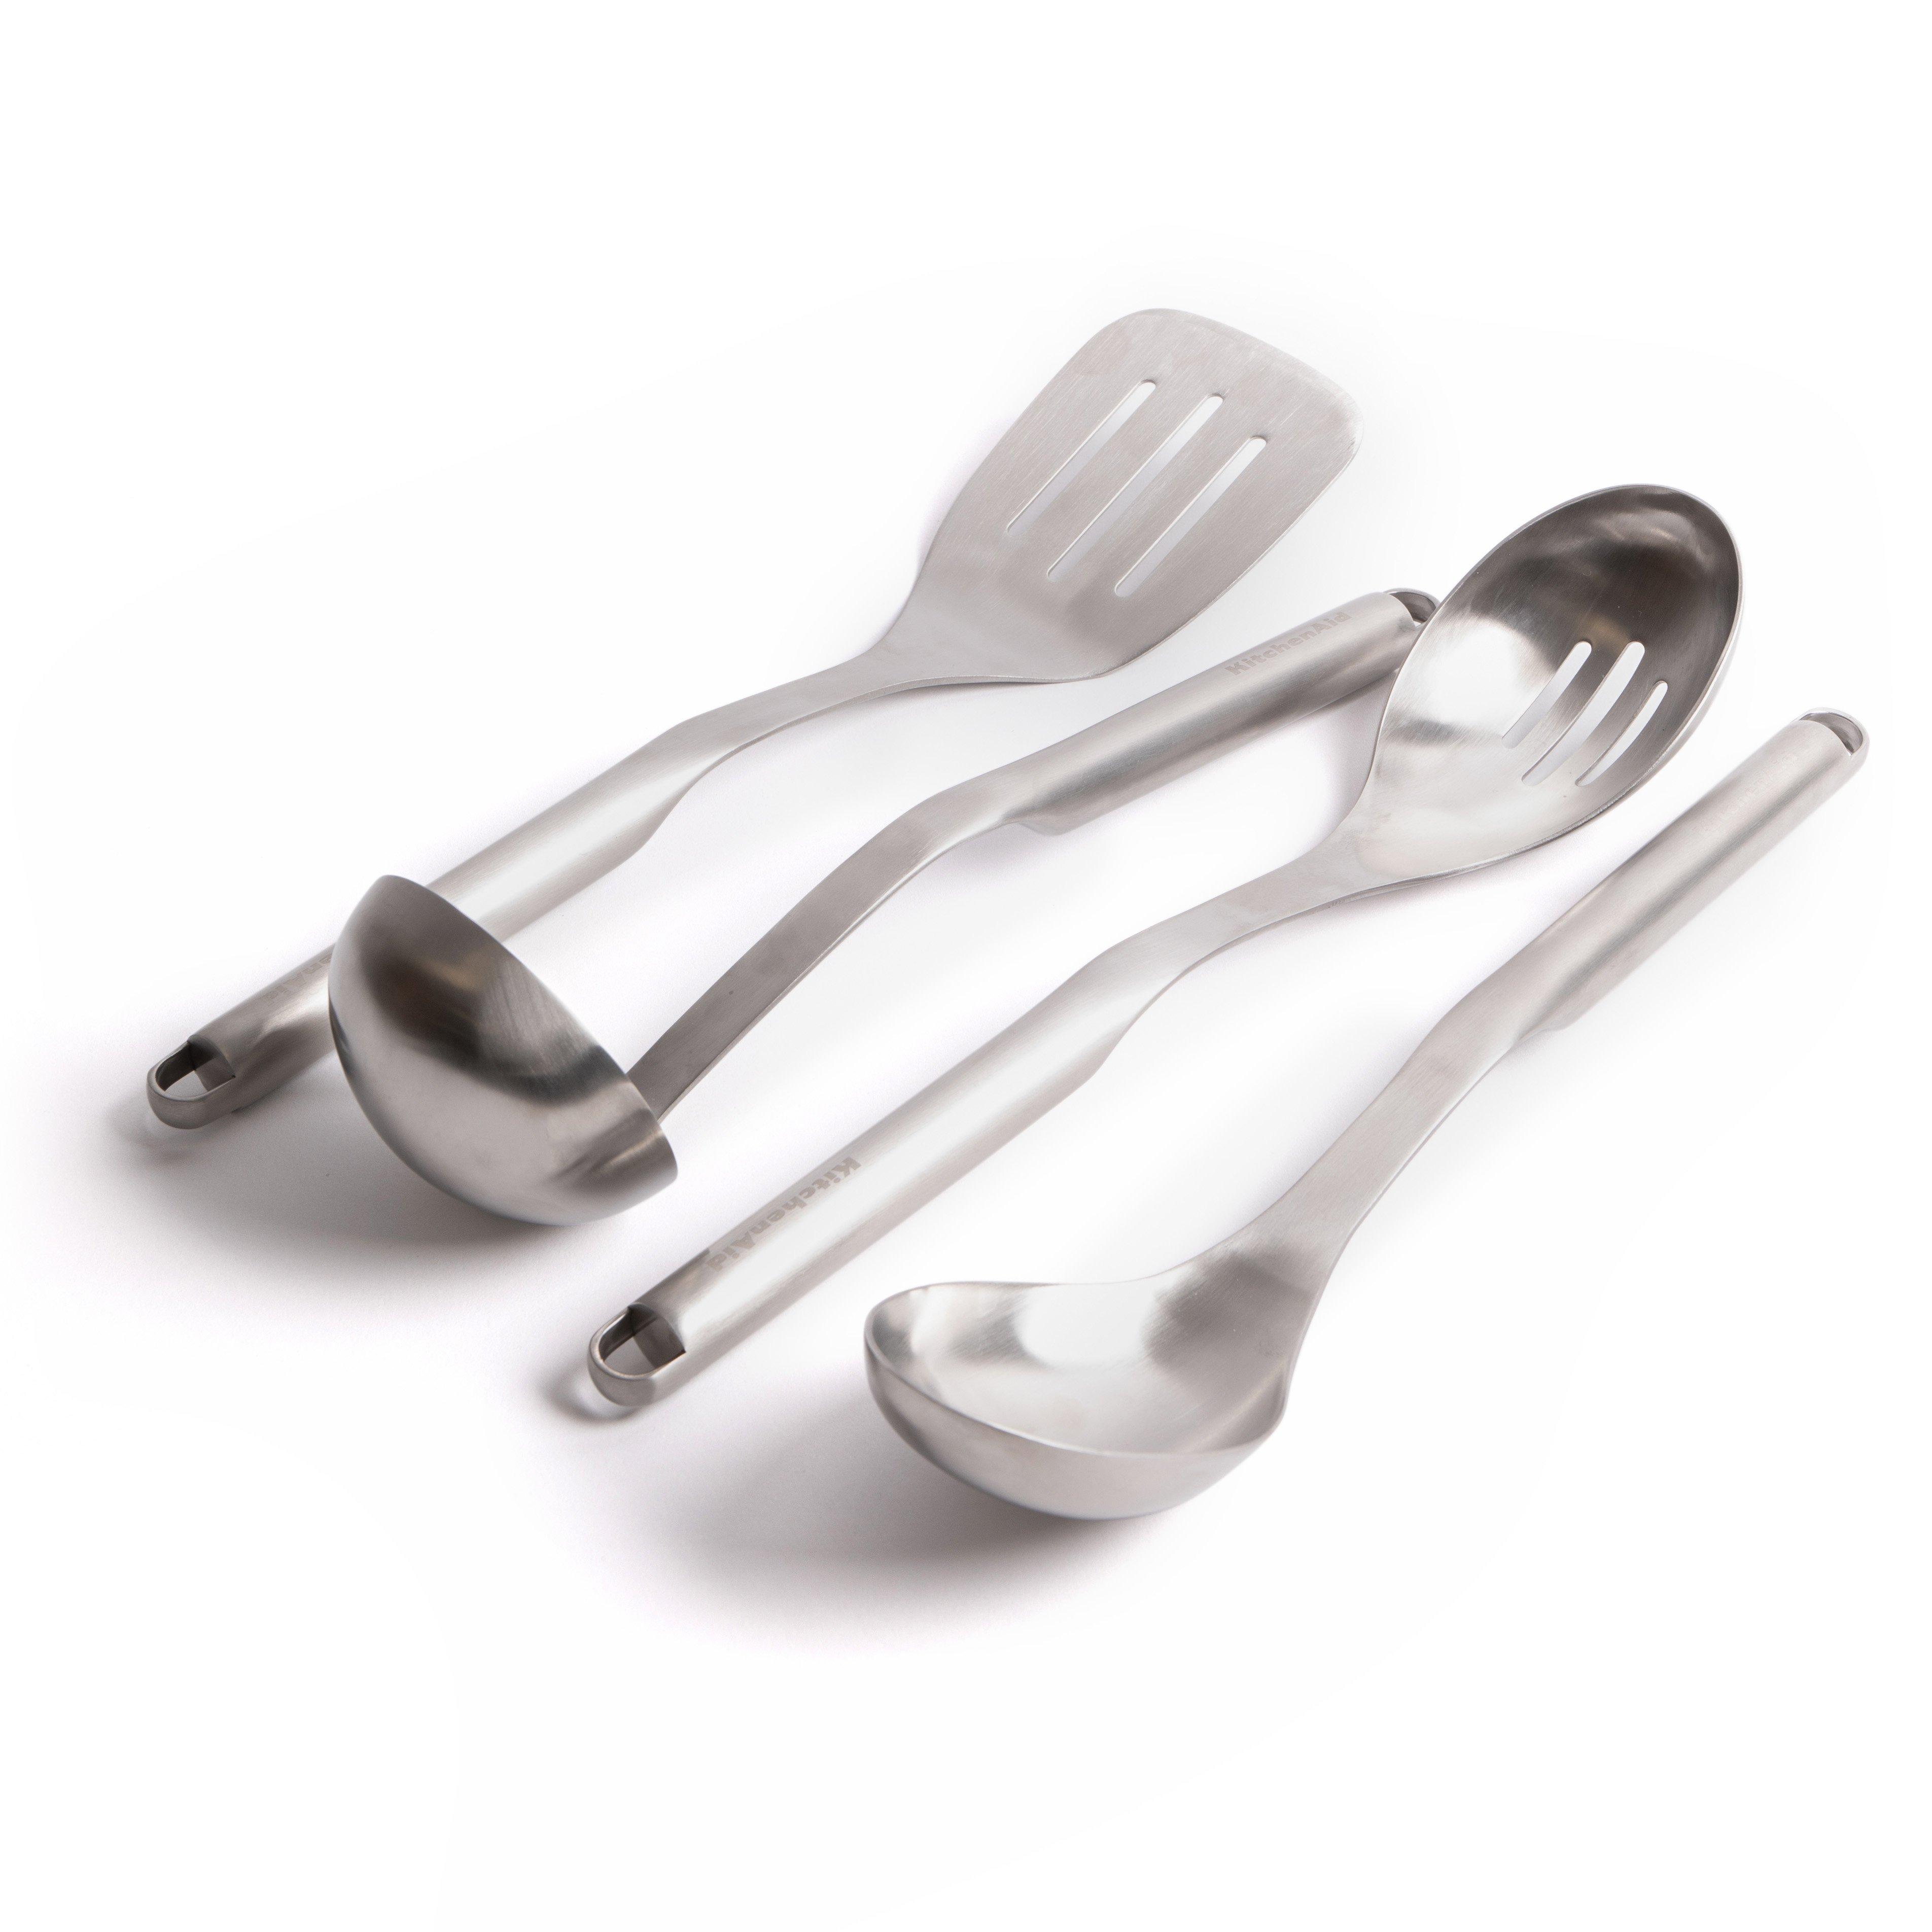 4pc Premium Stainless Steel Utensil Set with Slotted Spoon, Slotted Turner, Cooking Spoon and Ladle